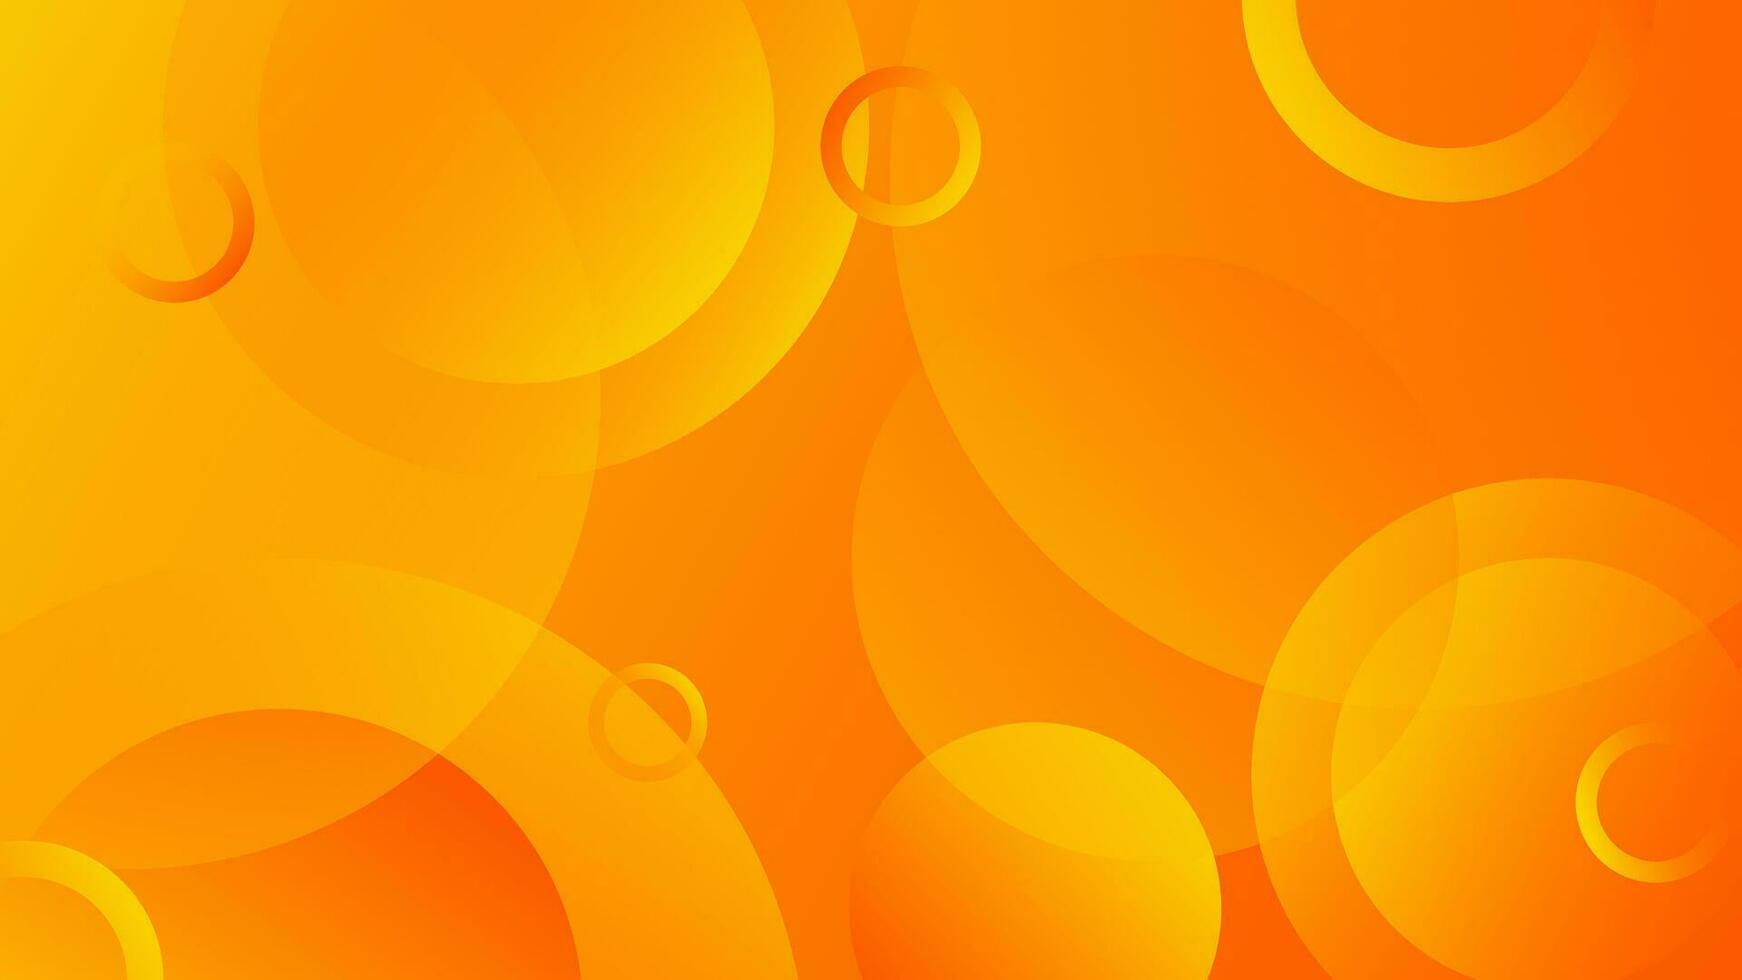 Simple dynamic futuristic modern background for landing page template. Gradient orange color theme. Wallpaper with abstract circle shapes vector